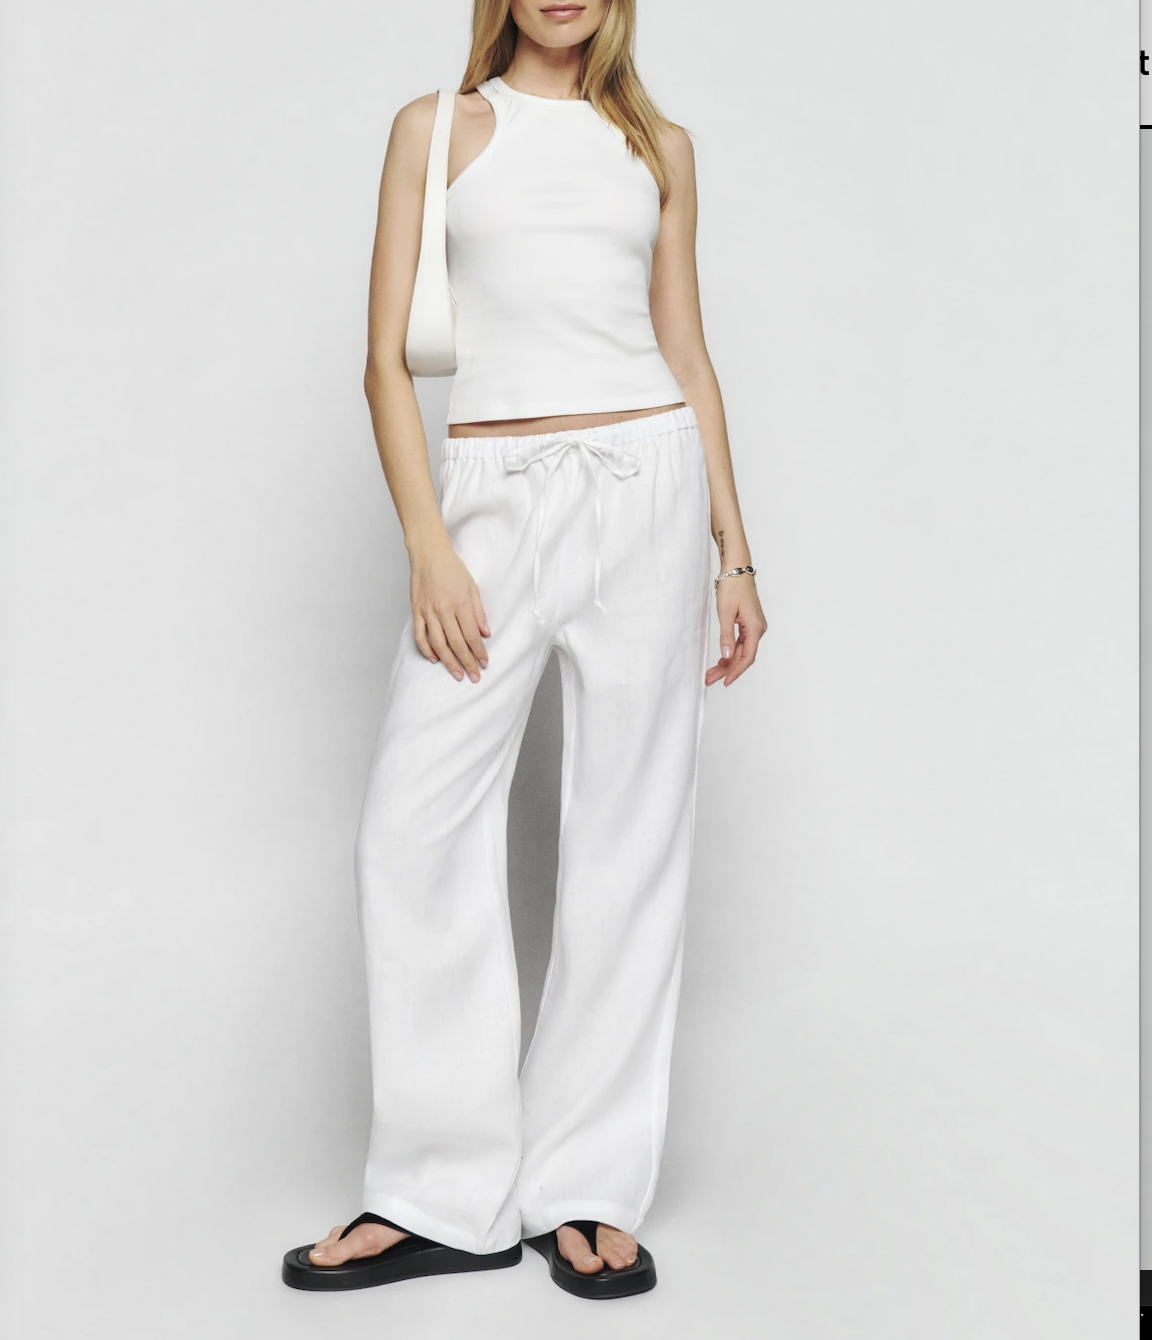 We All Needed Lightweight Comfy Summer Pants And Found 10 That We Love   Emily Henderson